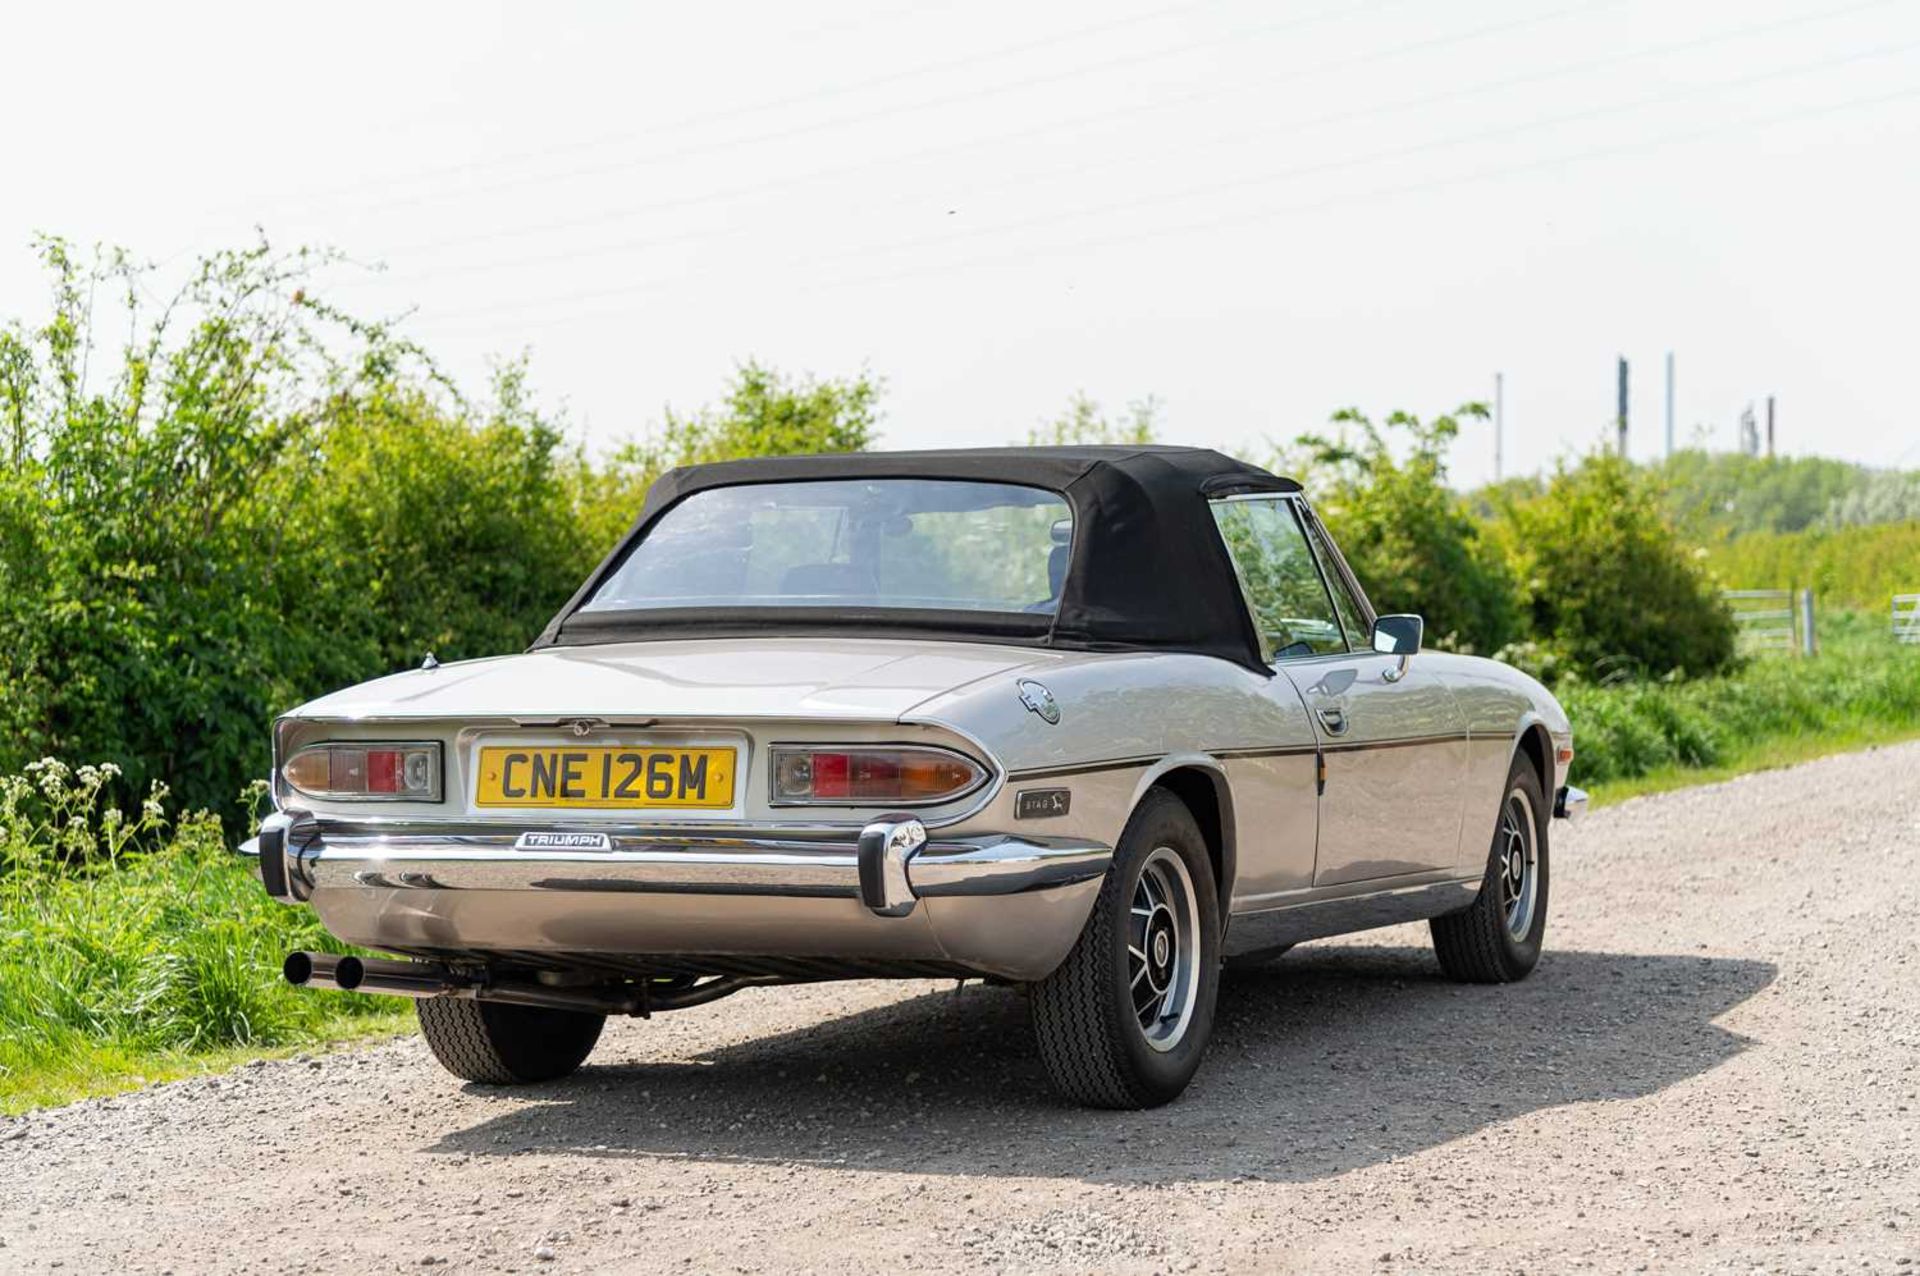 1974 Triumph Stag ***NO RESERVE*** Fully-restored example, equipped with manual overdrive transmissi - Image 20 of 83